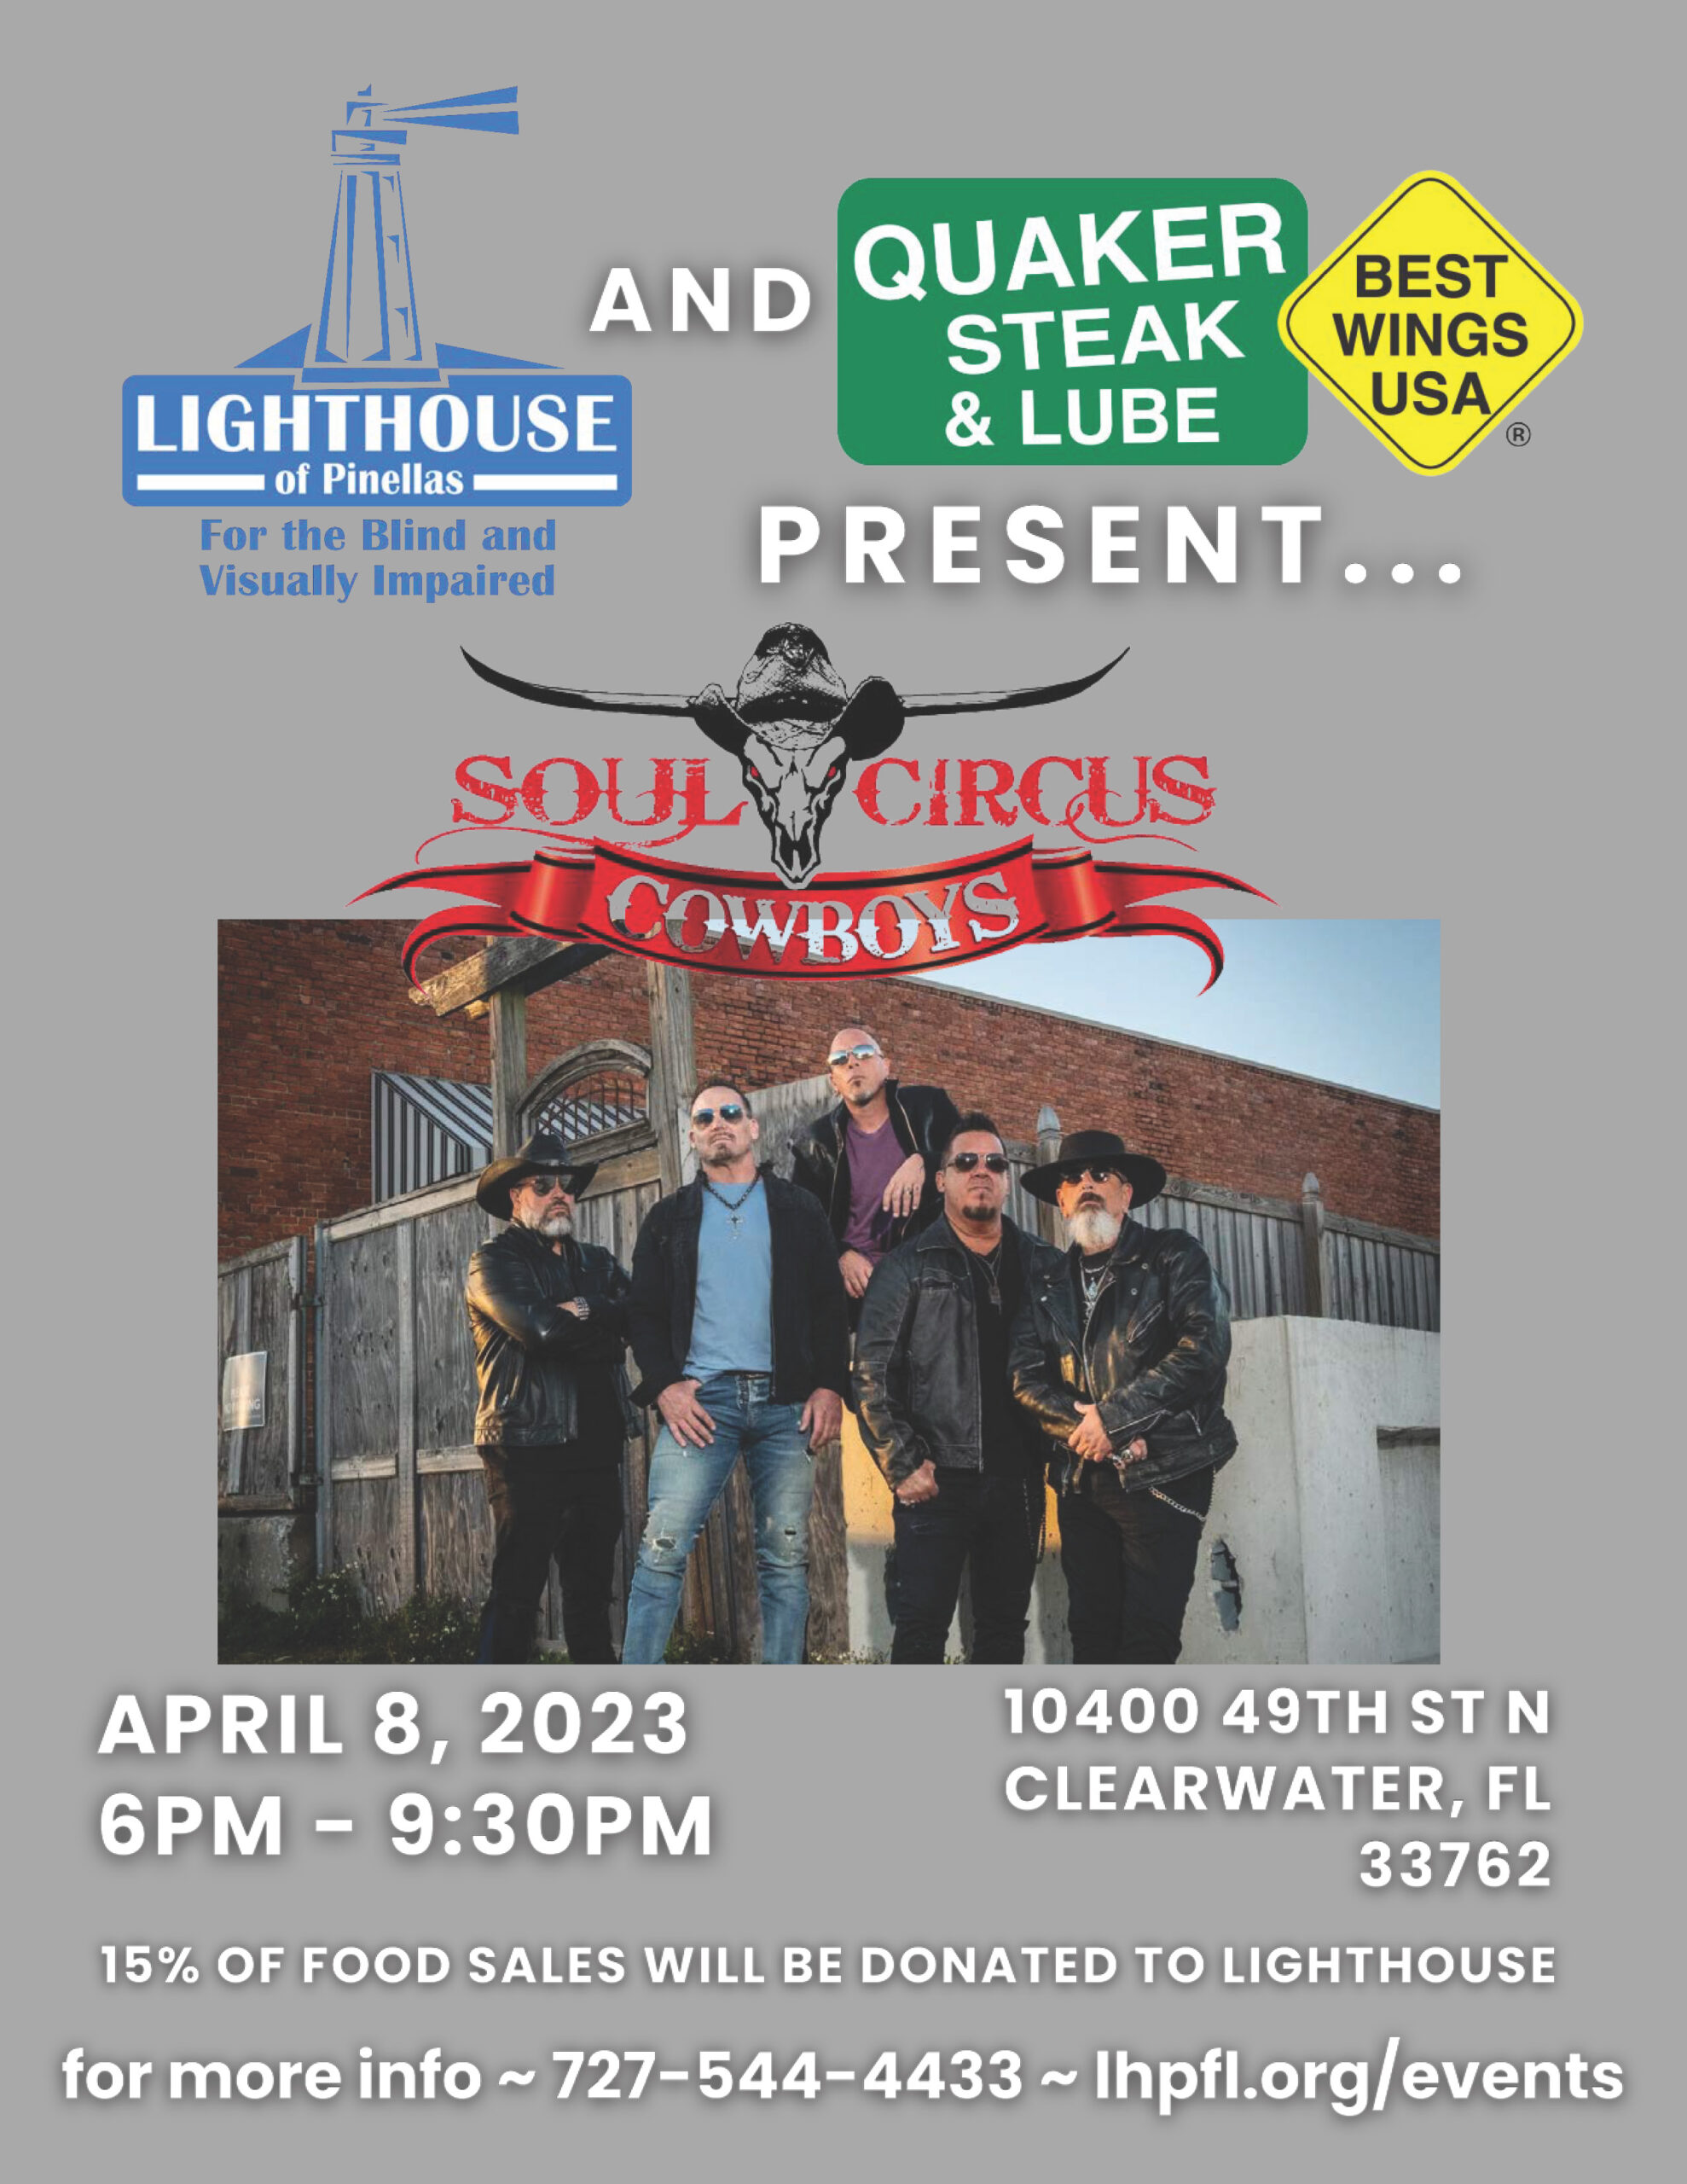 Event flyer. Click to download PDF version. Lighthouse of Pinellas and Quaker Steak and Lube present Soul Circus Cowboys April 8, 2023, 6pm-9:30pm 10400 49th St. N. Clearwater, FL 33762 15% of food sales will be donated to Lighthouse For more info, call 727-544-4433 or go to lhpfl.org/events